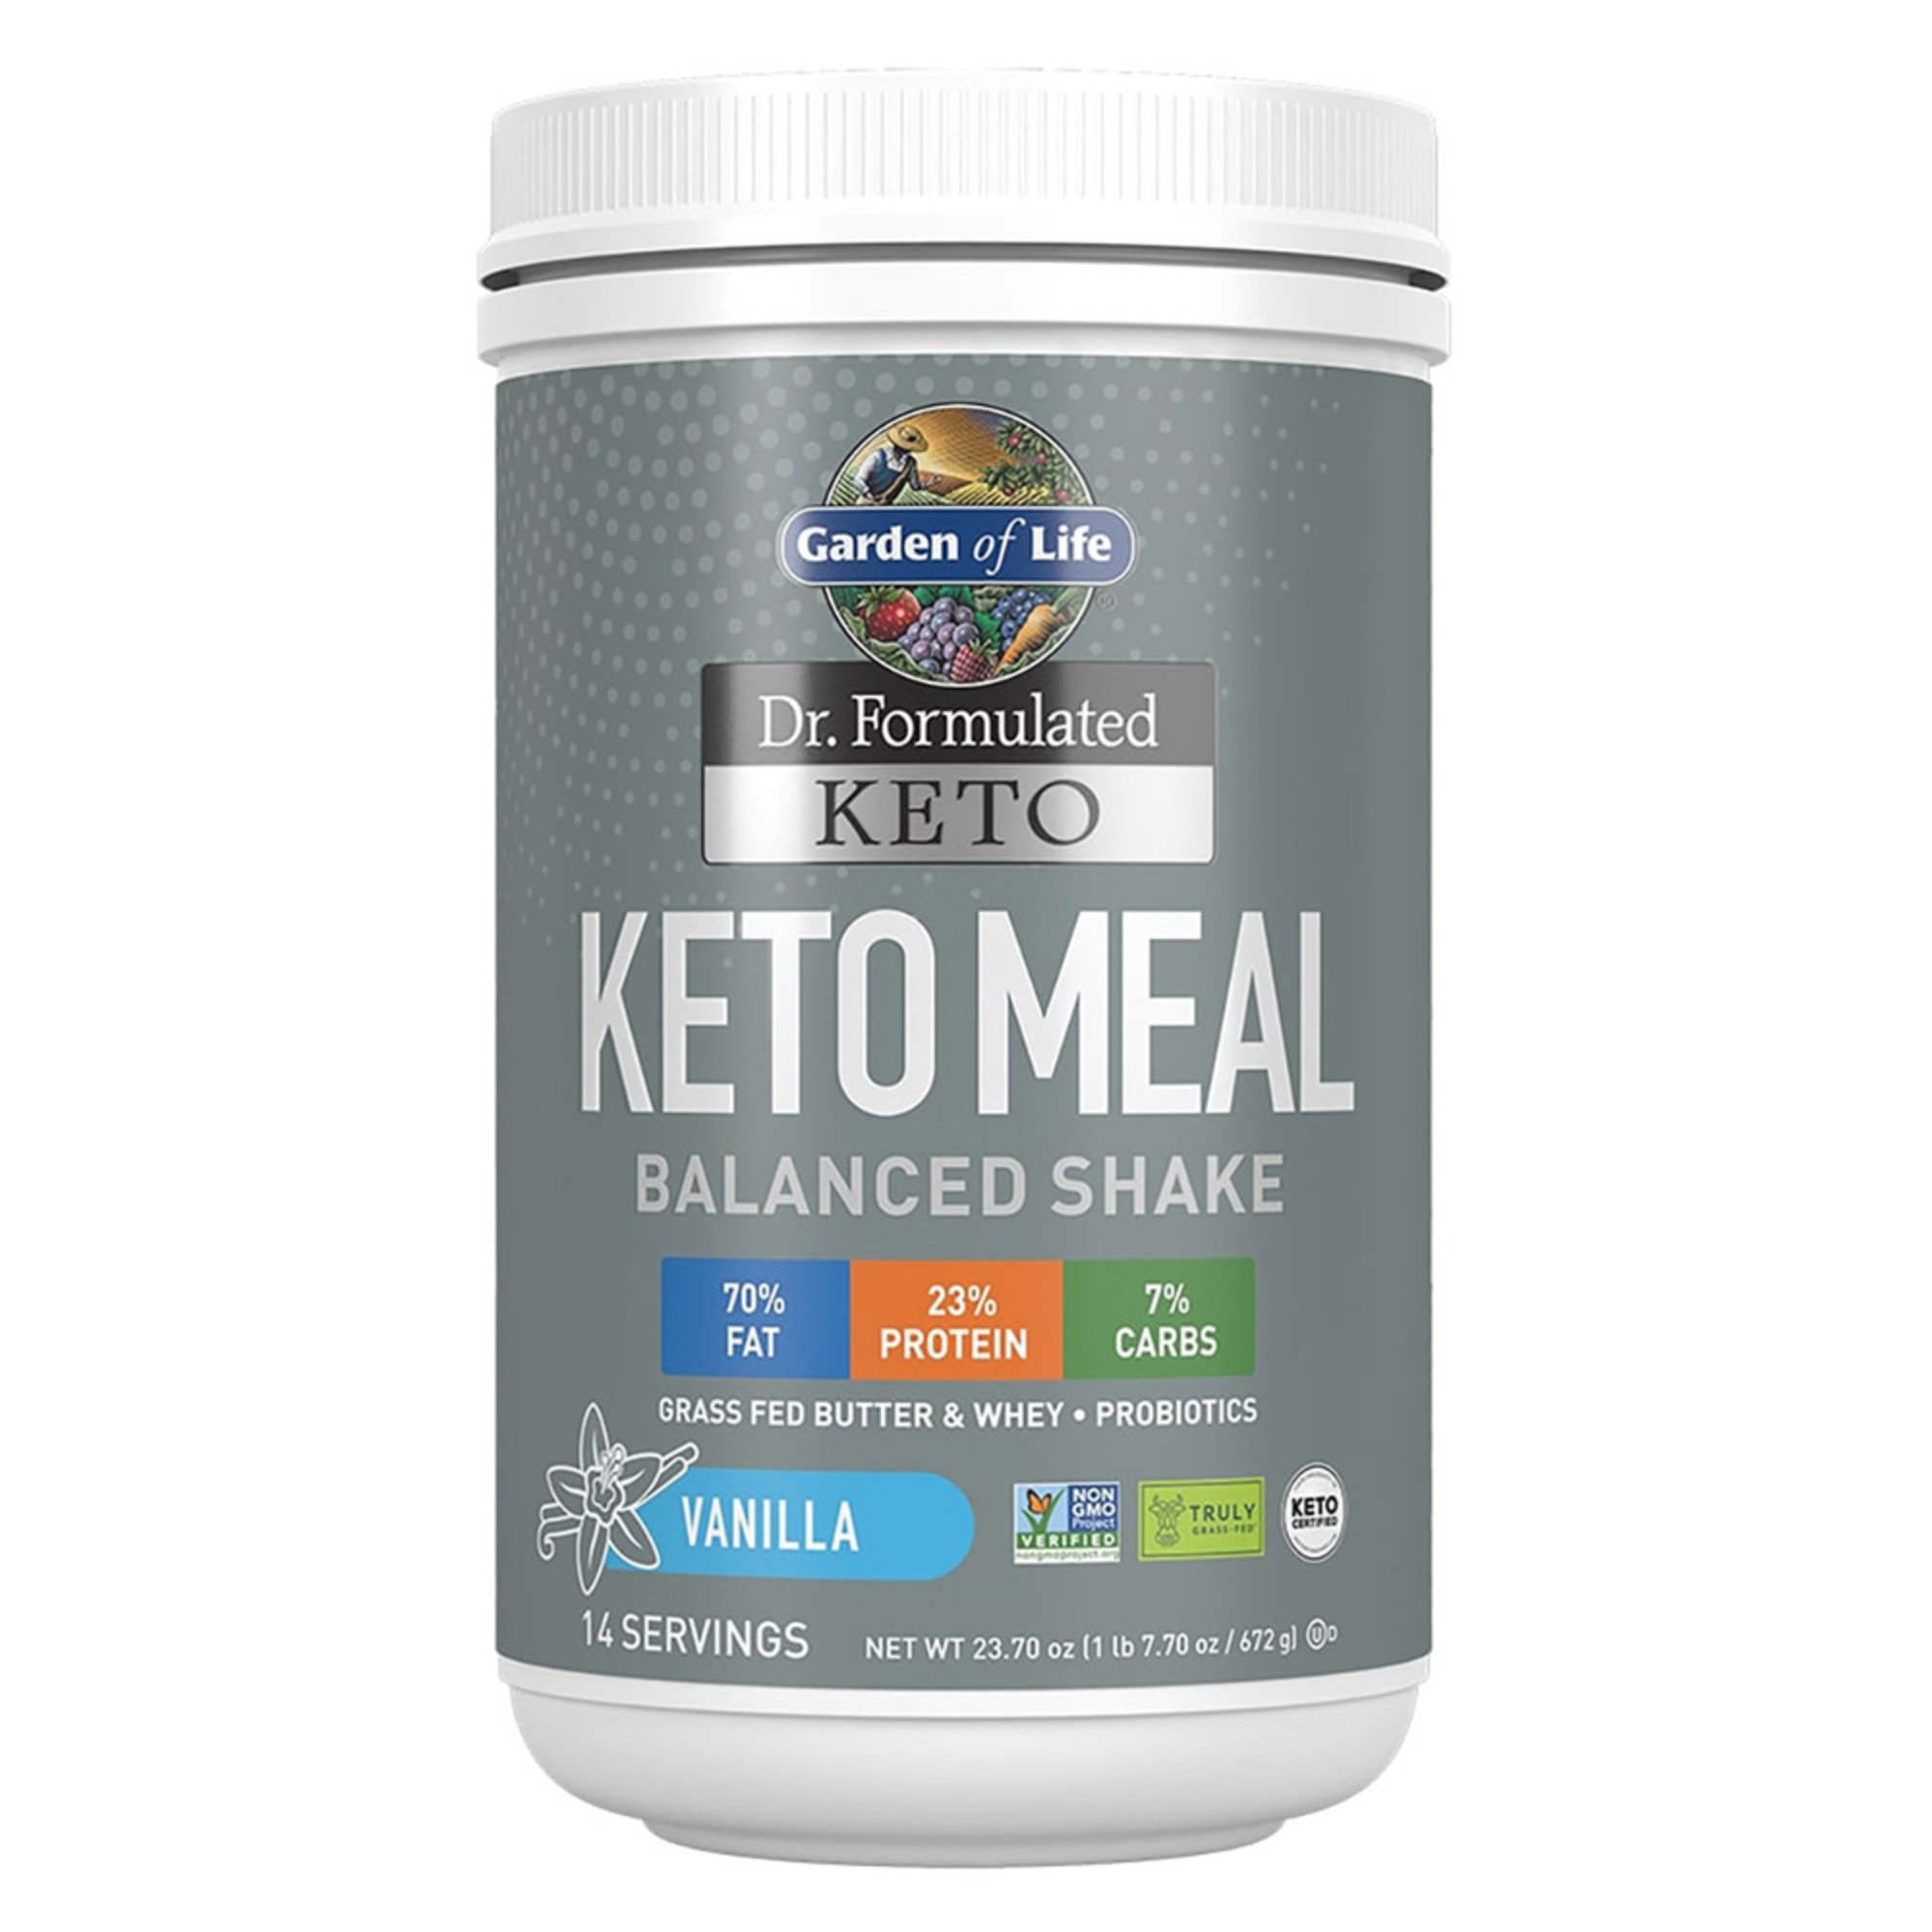 5 Day Keto pre workout meal for Weight Loss